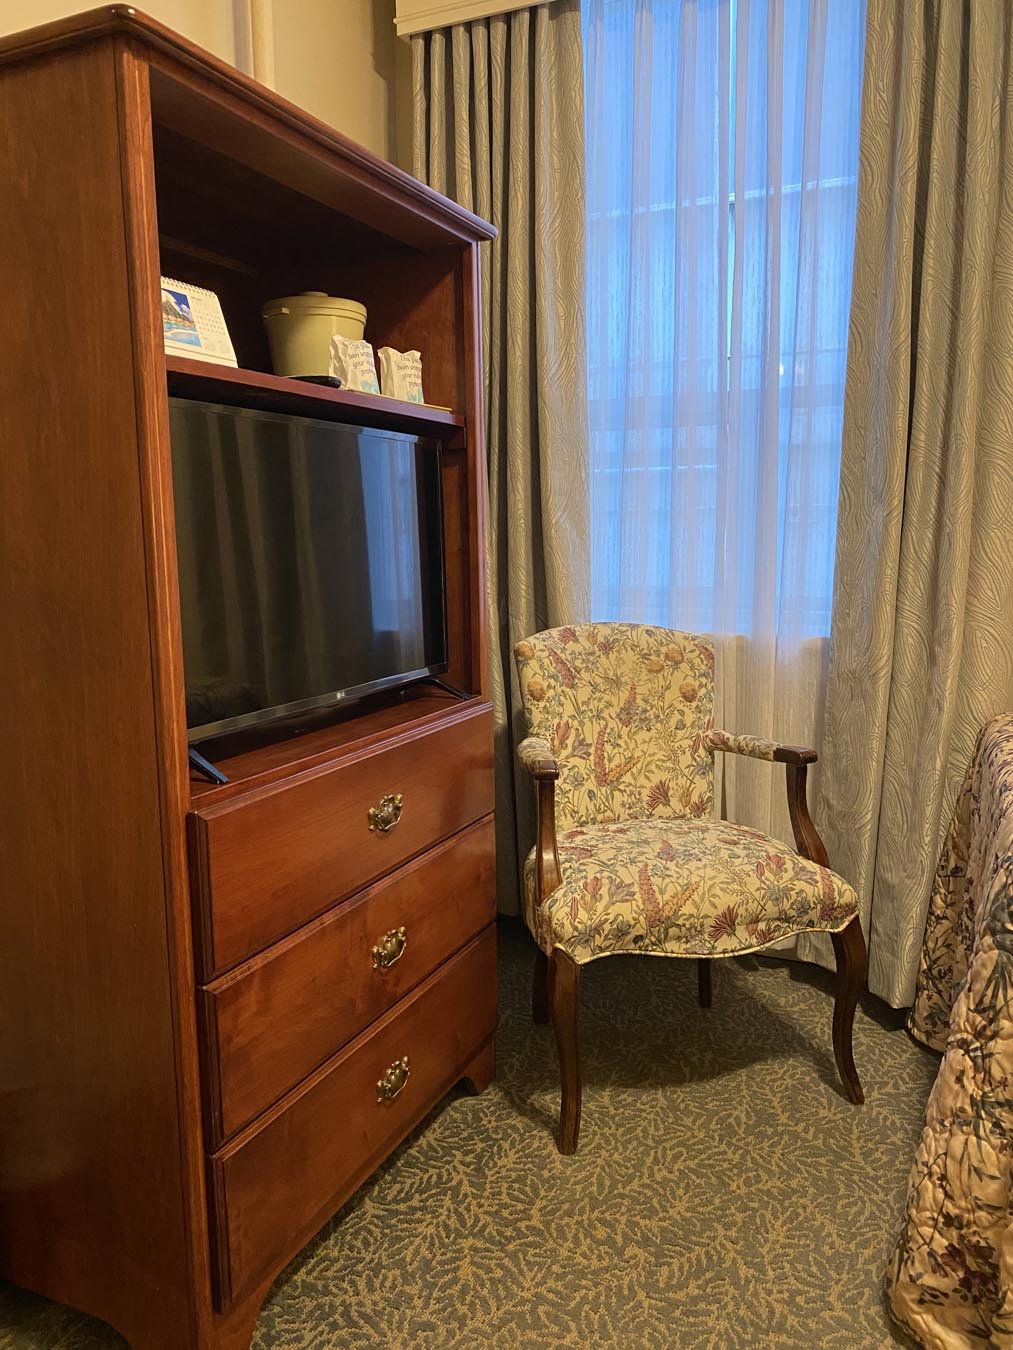 Chair in room